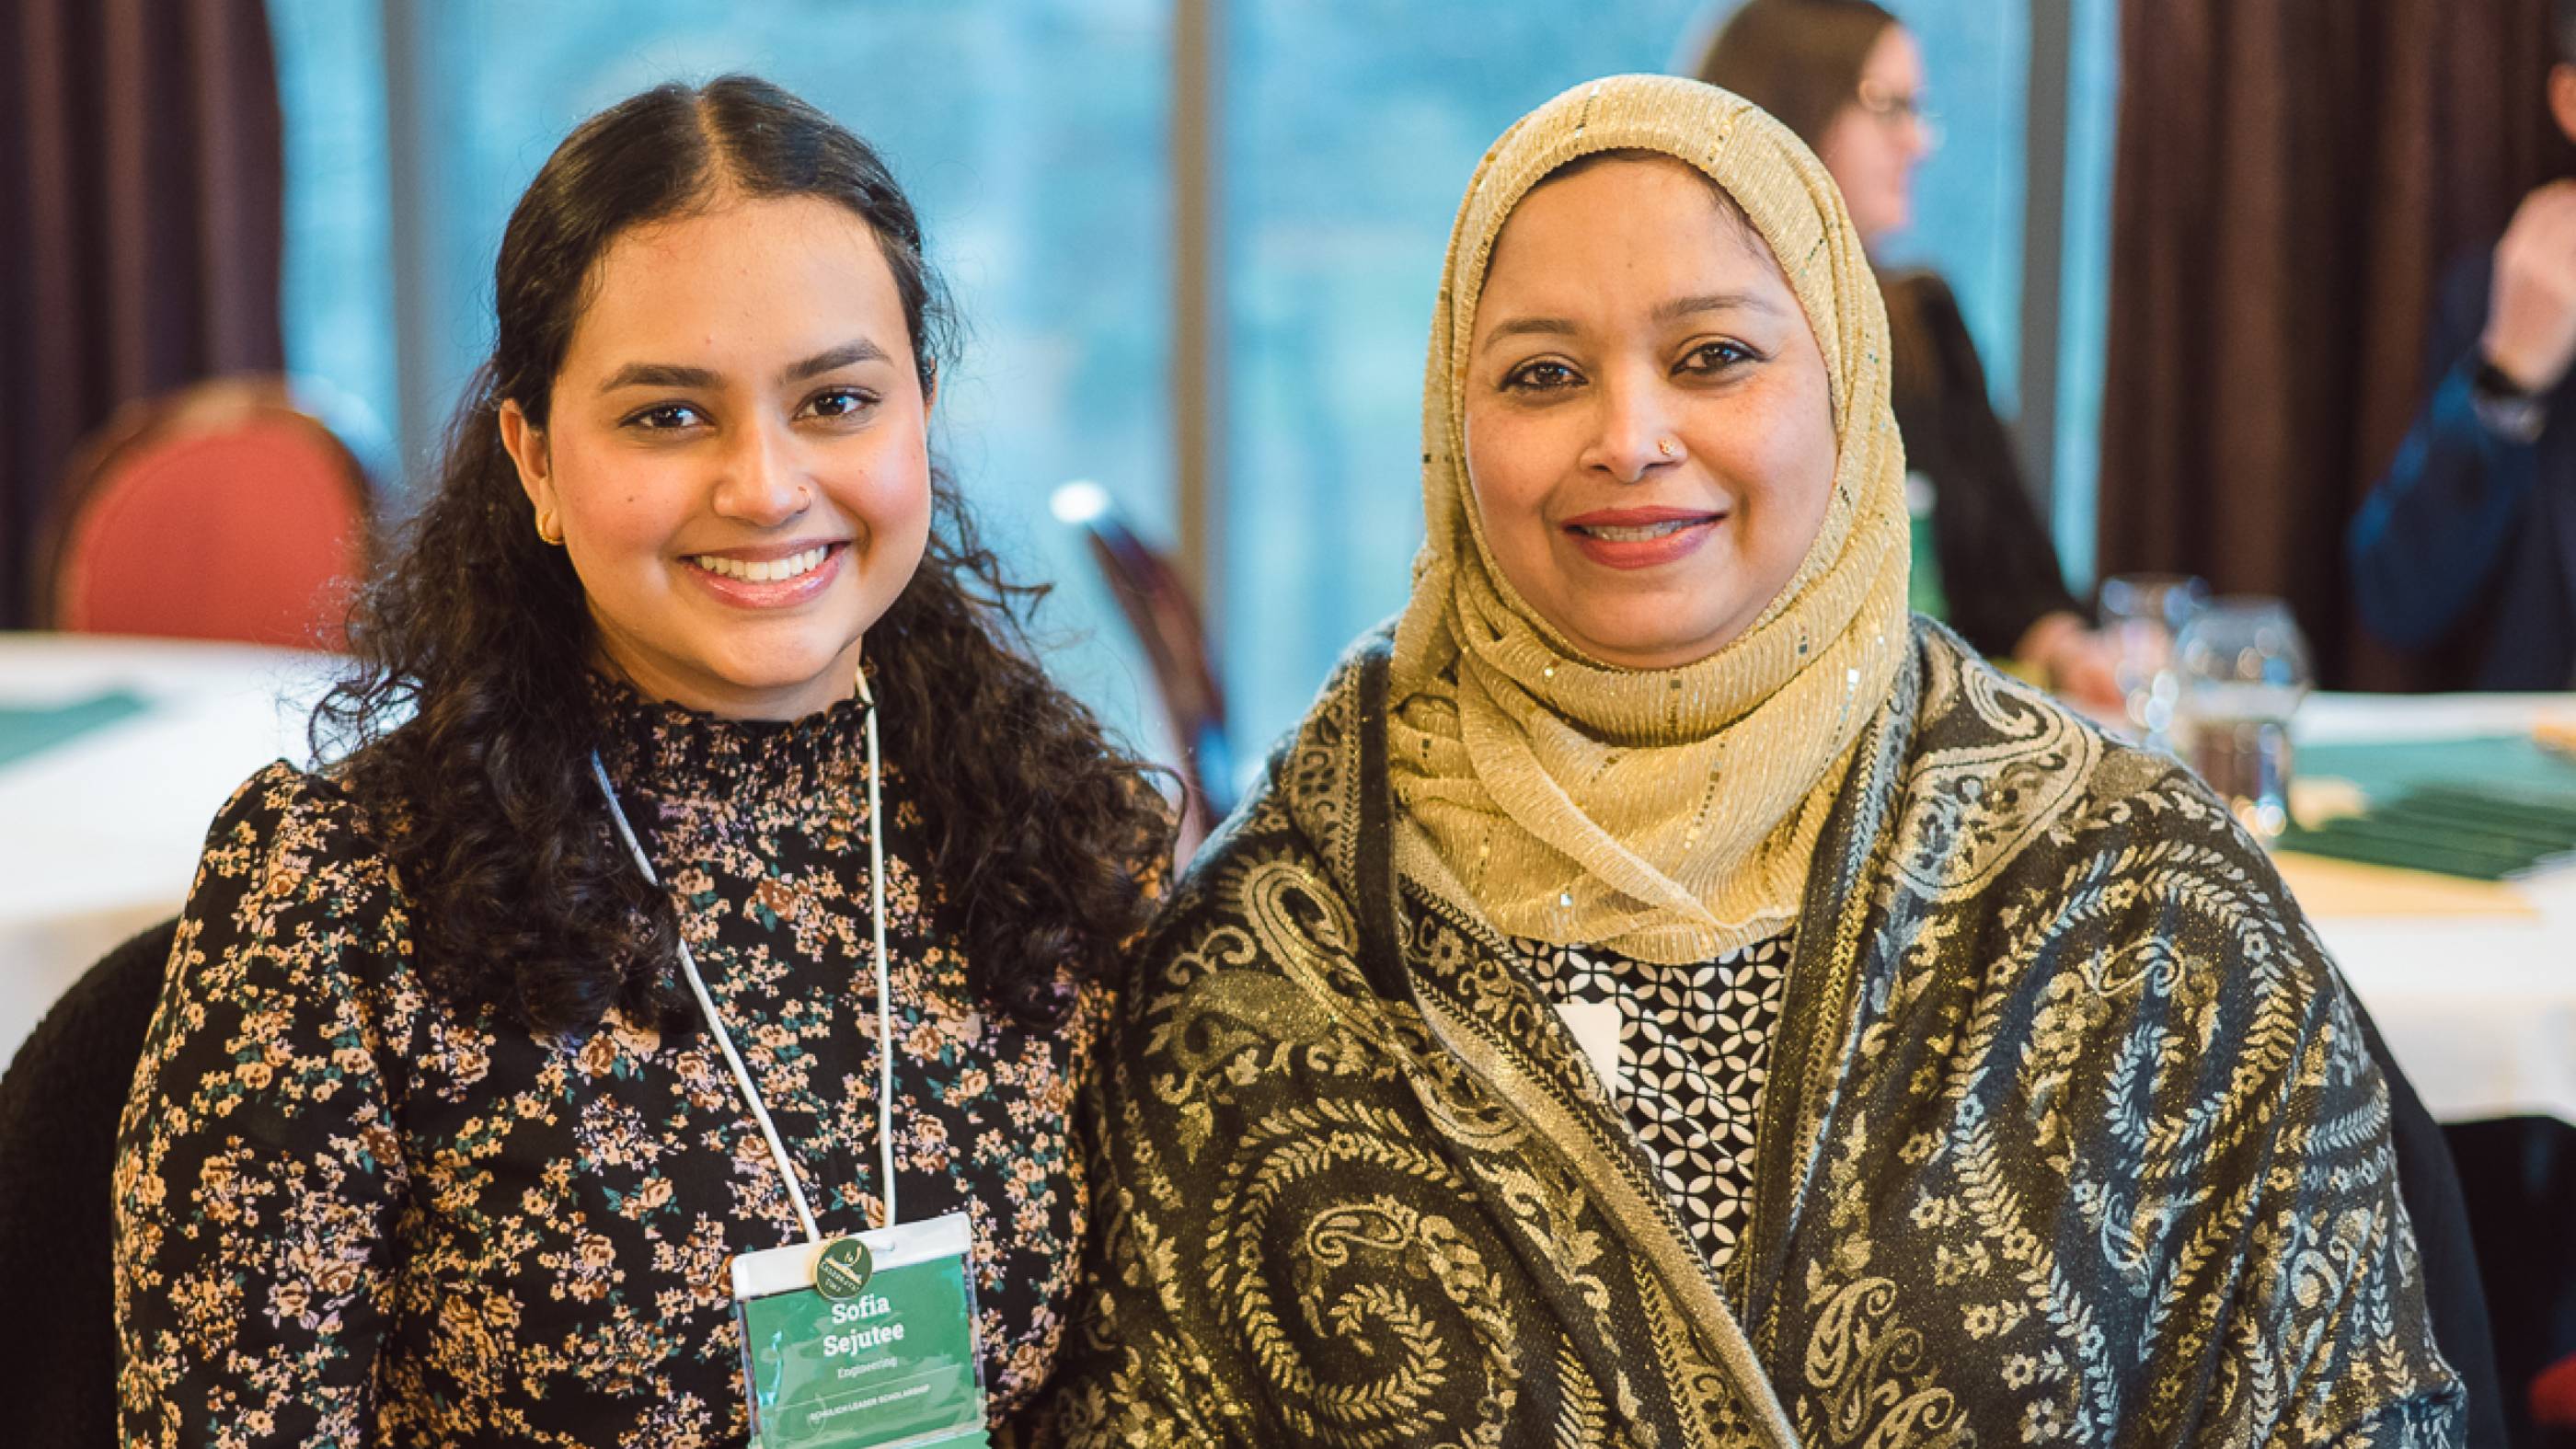 Sofia Sejutee (left), a winner of the Schulich Leader Scholarship